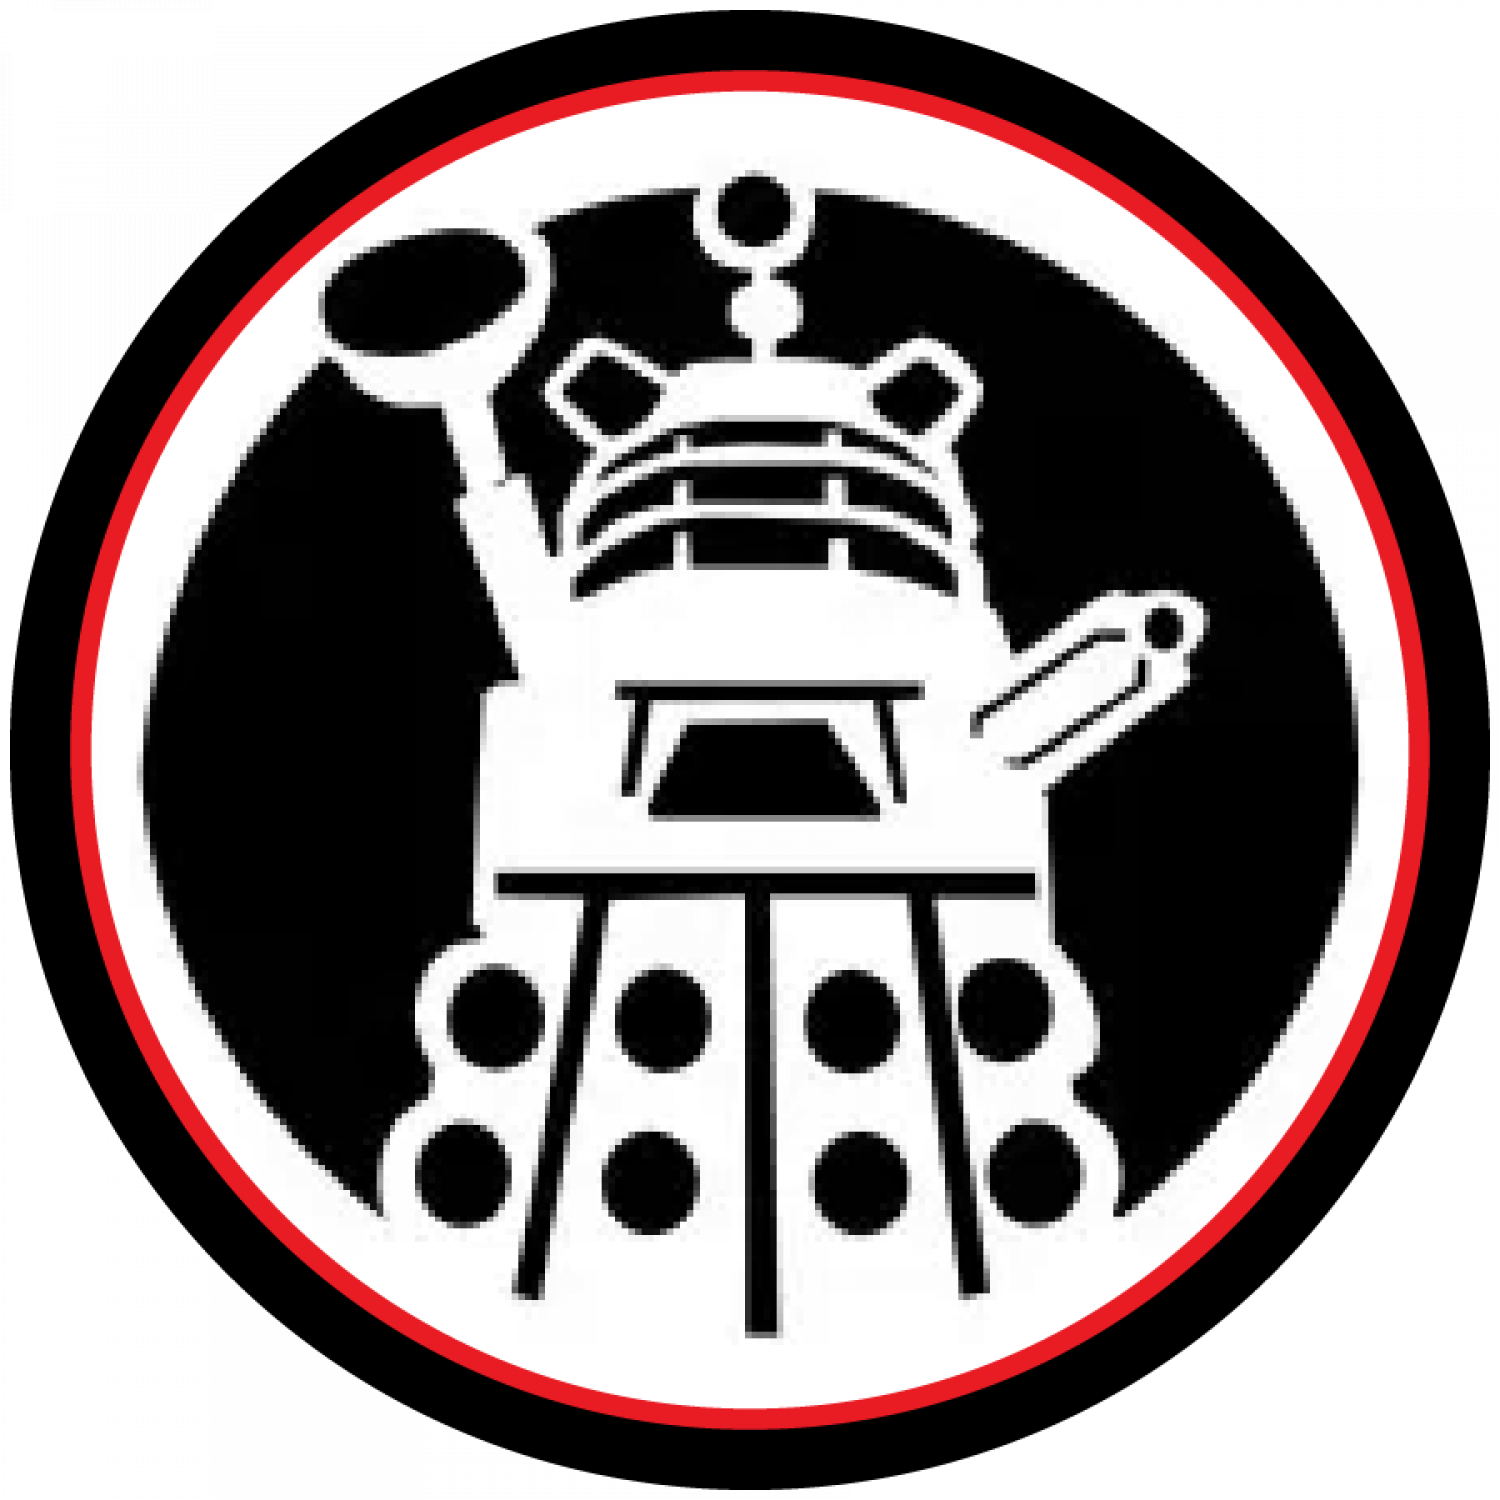 Black and white line art of a Dalek from Doctor Who